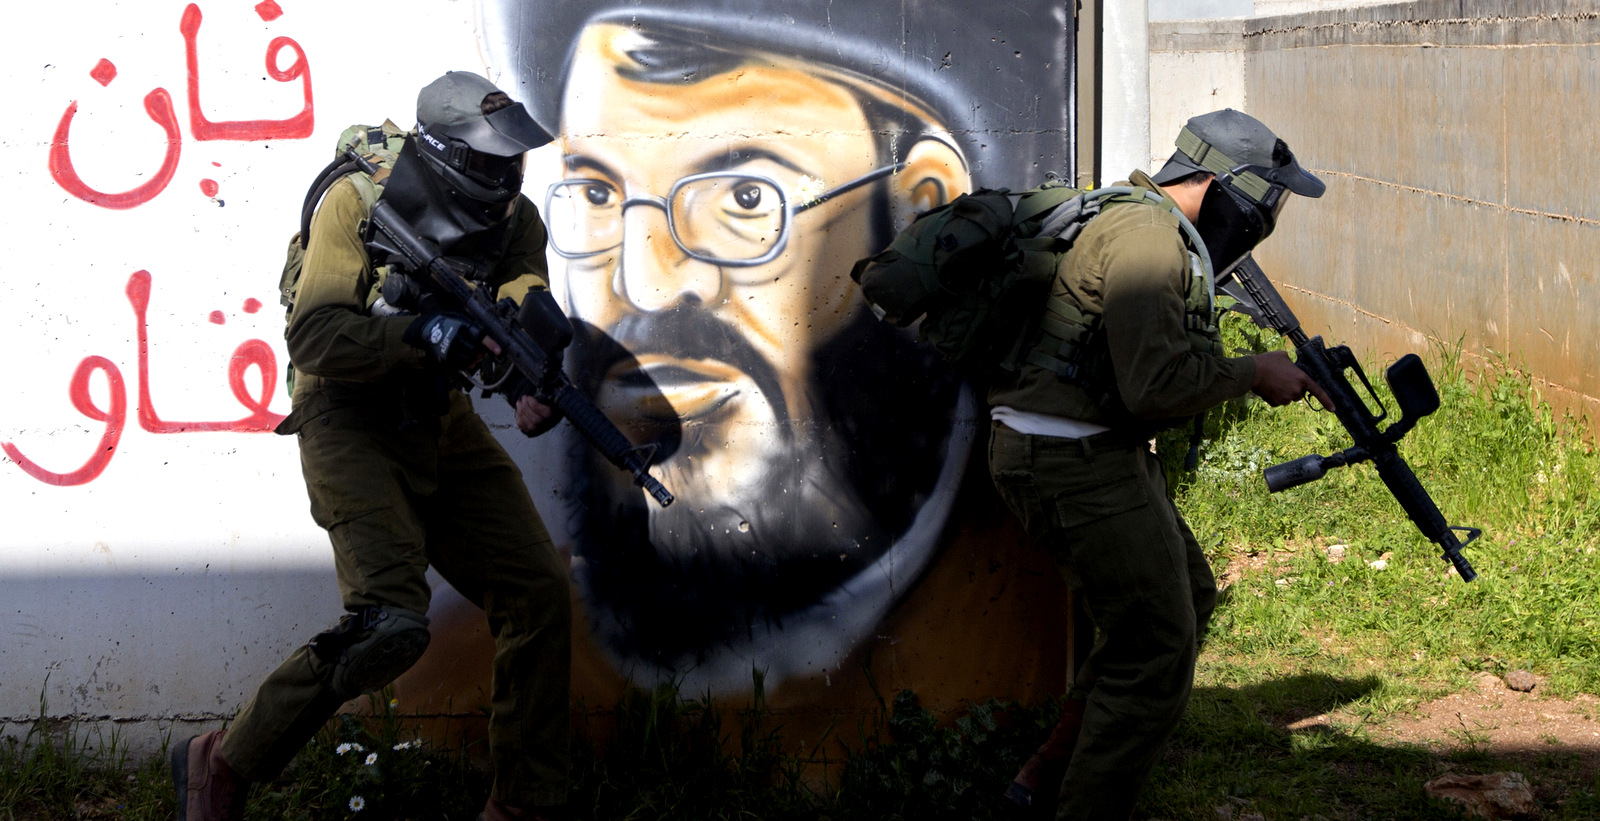 Israeli soldiers train with paintball guns during a drill at an Army base near Elyakim, Israel. Between myriad concrete buildings with Arabic graffiti that are designed to simulate a typical Lebanese village, dozens of Israeli officers are gearing up for their next battle with Hezbollah. The Arabic is random letters, and the graffiti depicts Hezbollah's leader Hassan Nasrallah, March 29, 2017.(AP/Sebastian Scheiner)